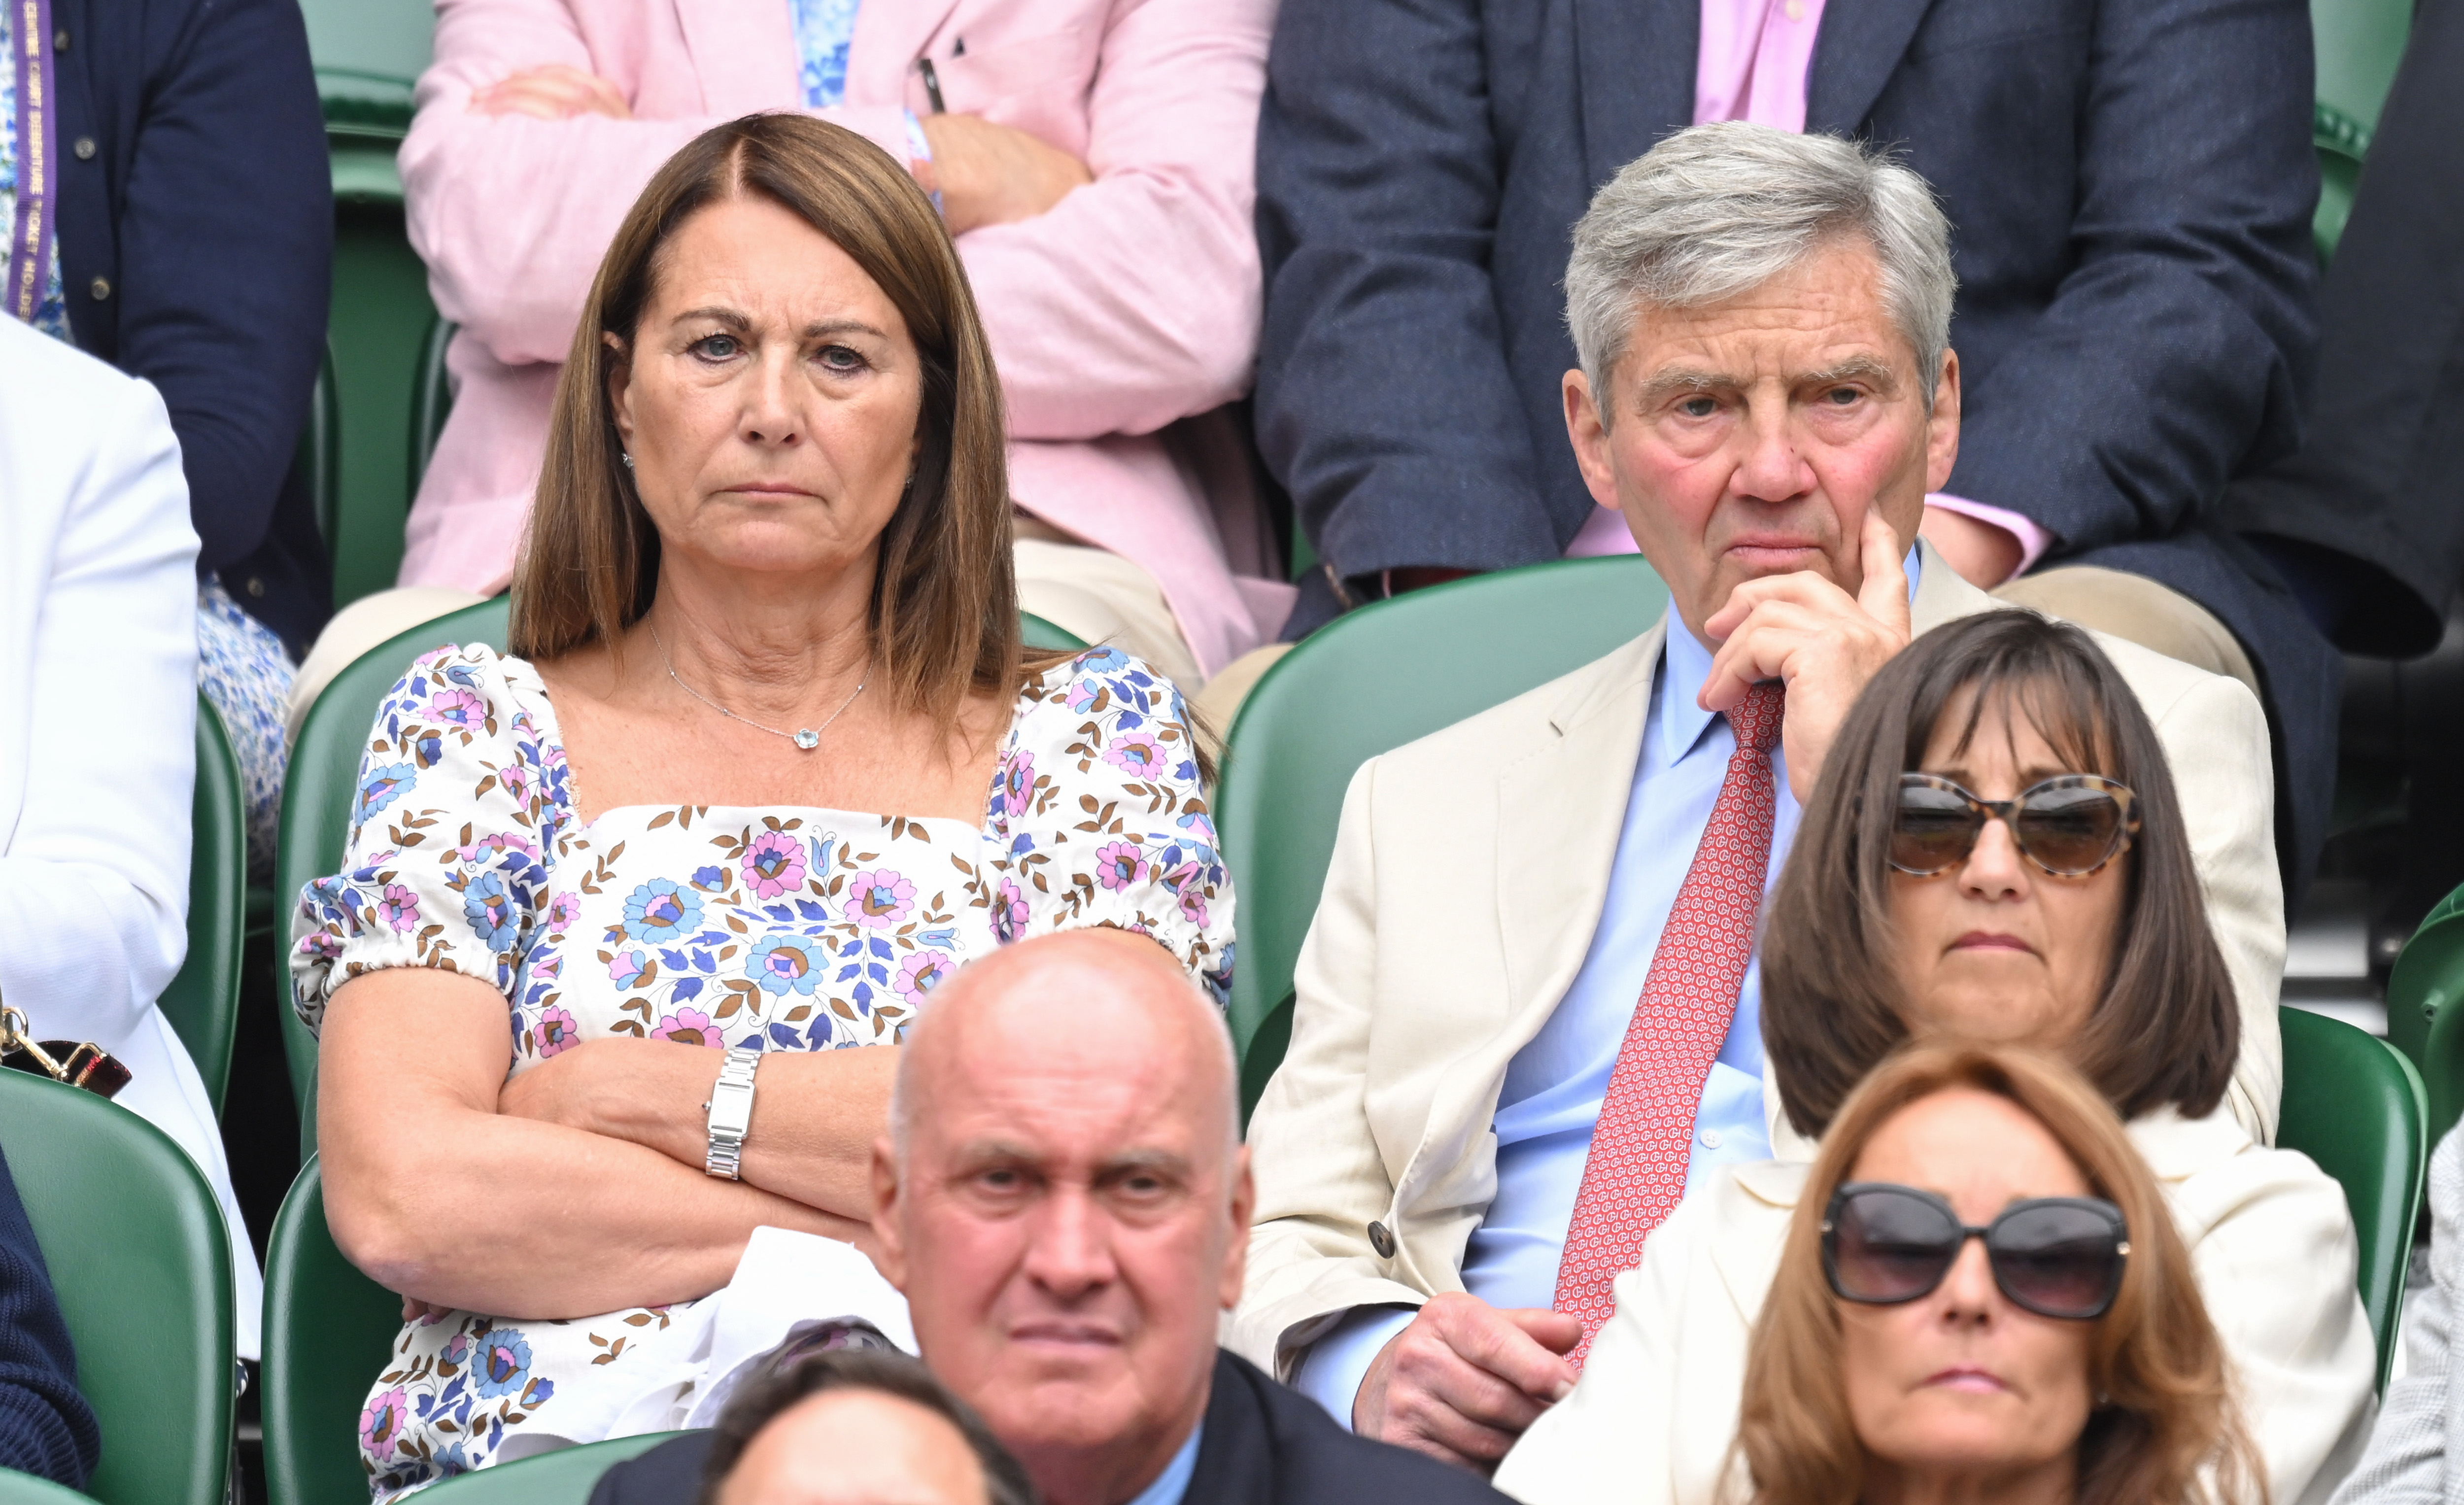 Carole and Michael Middleton attending Day Three of Wimbledon 2022 in London, England on June 29, 2022 | Source: Getty Images